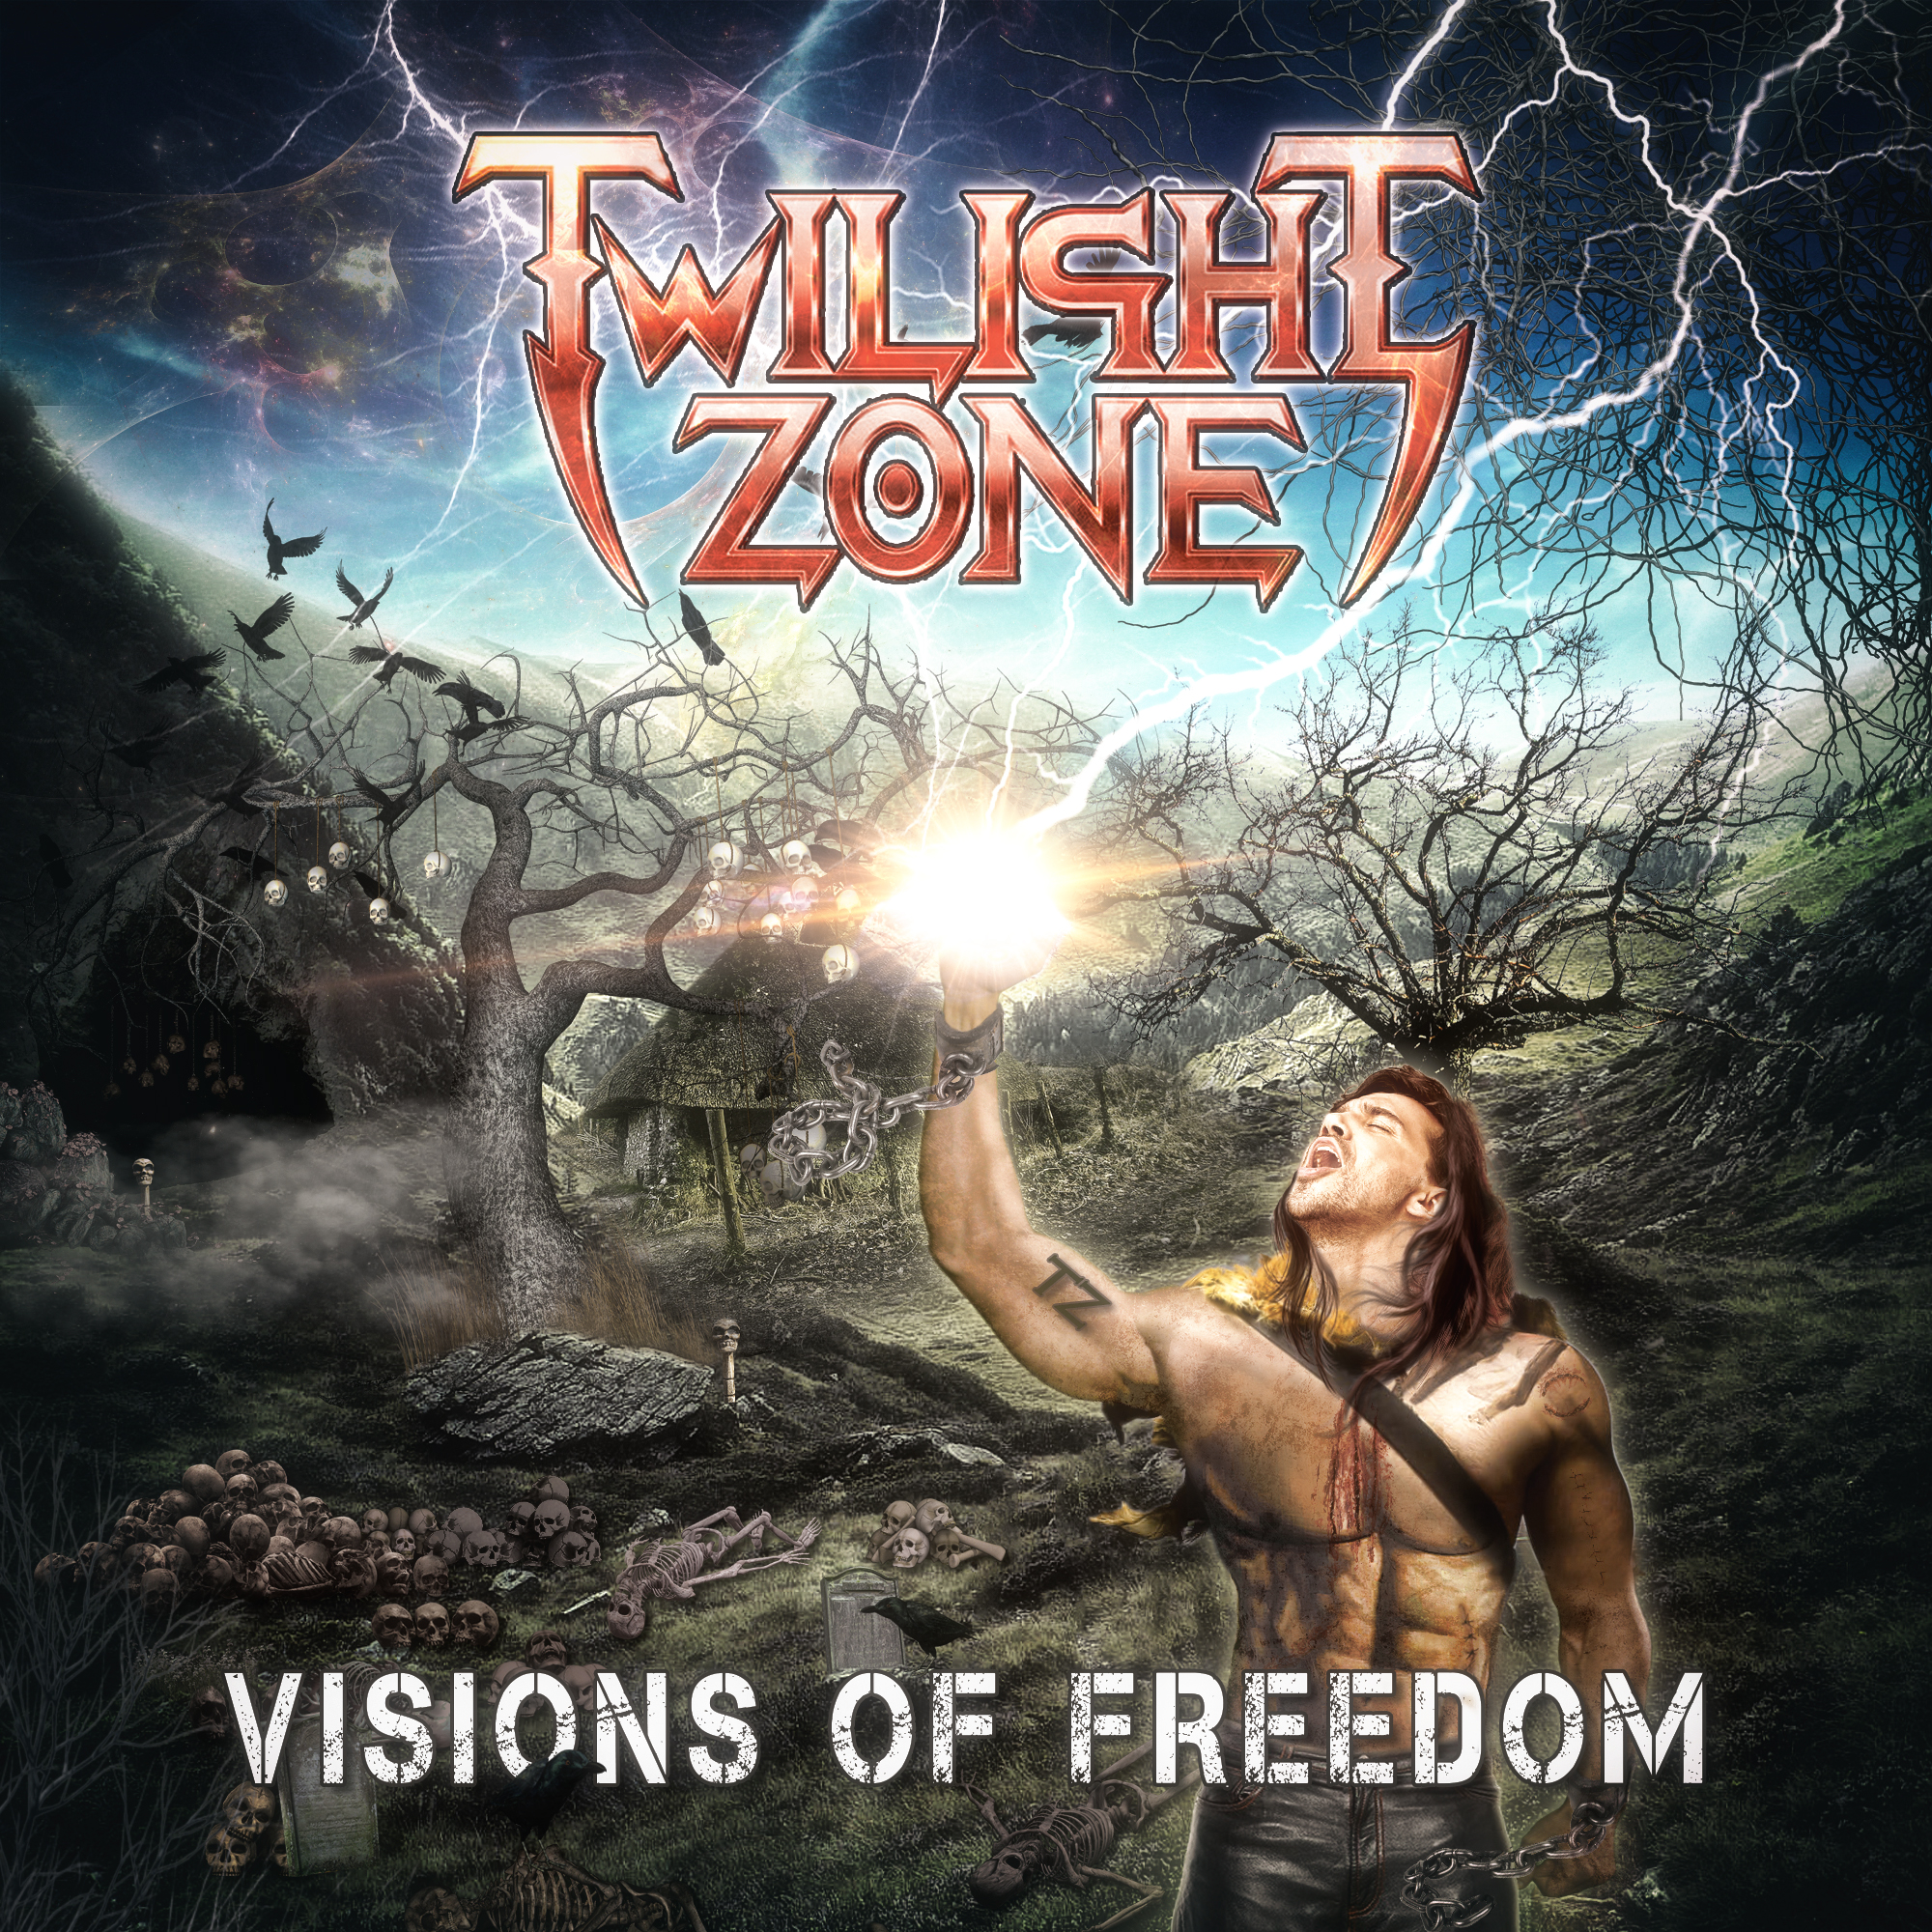 Twilight Zone – “Visions of Freedom”